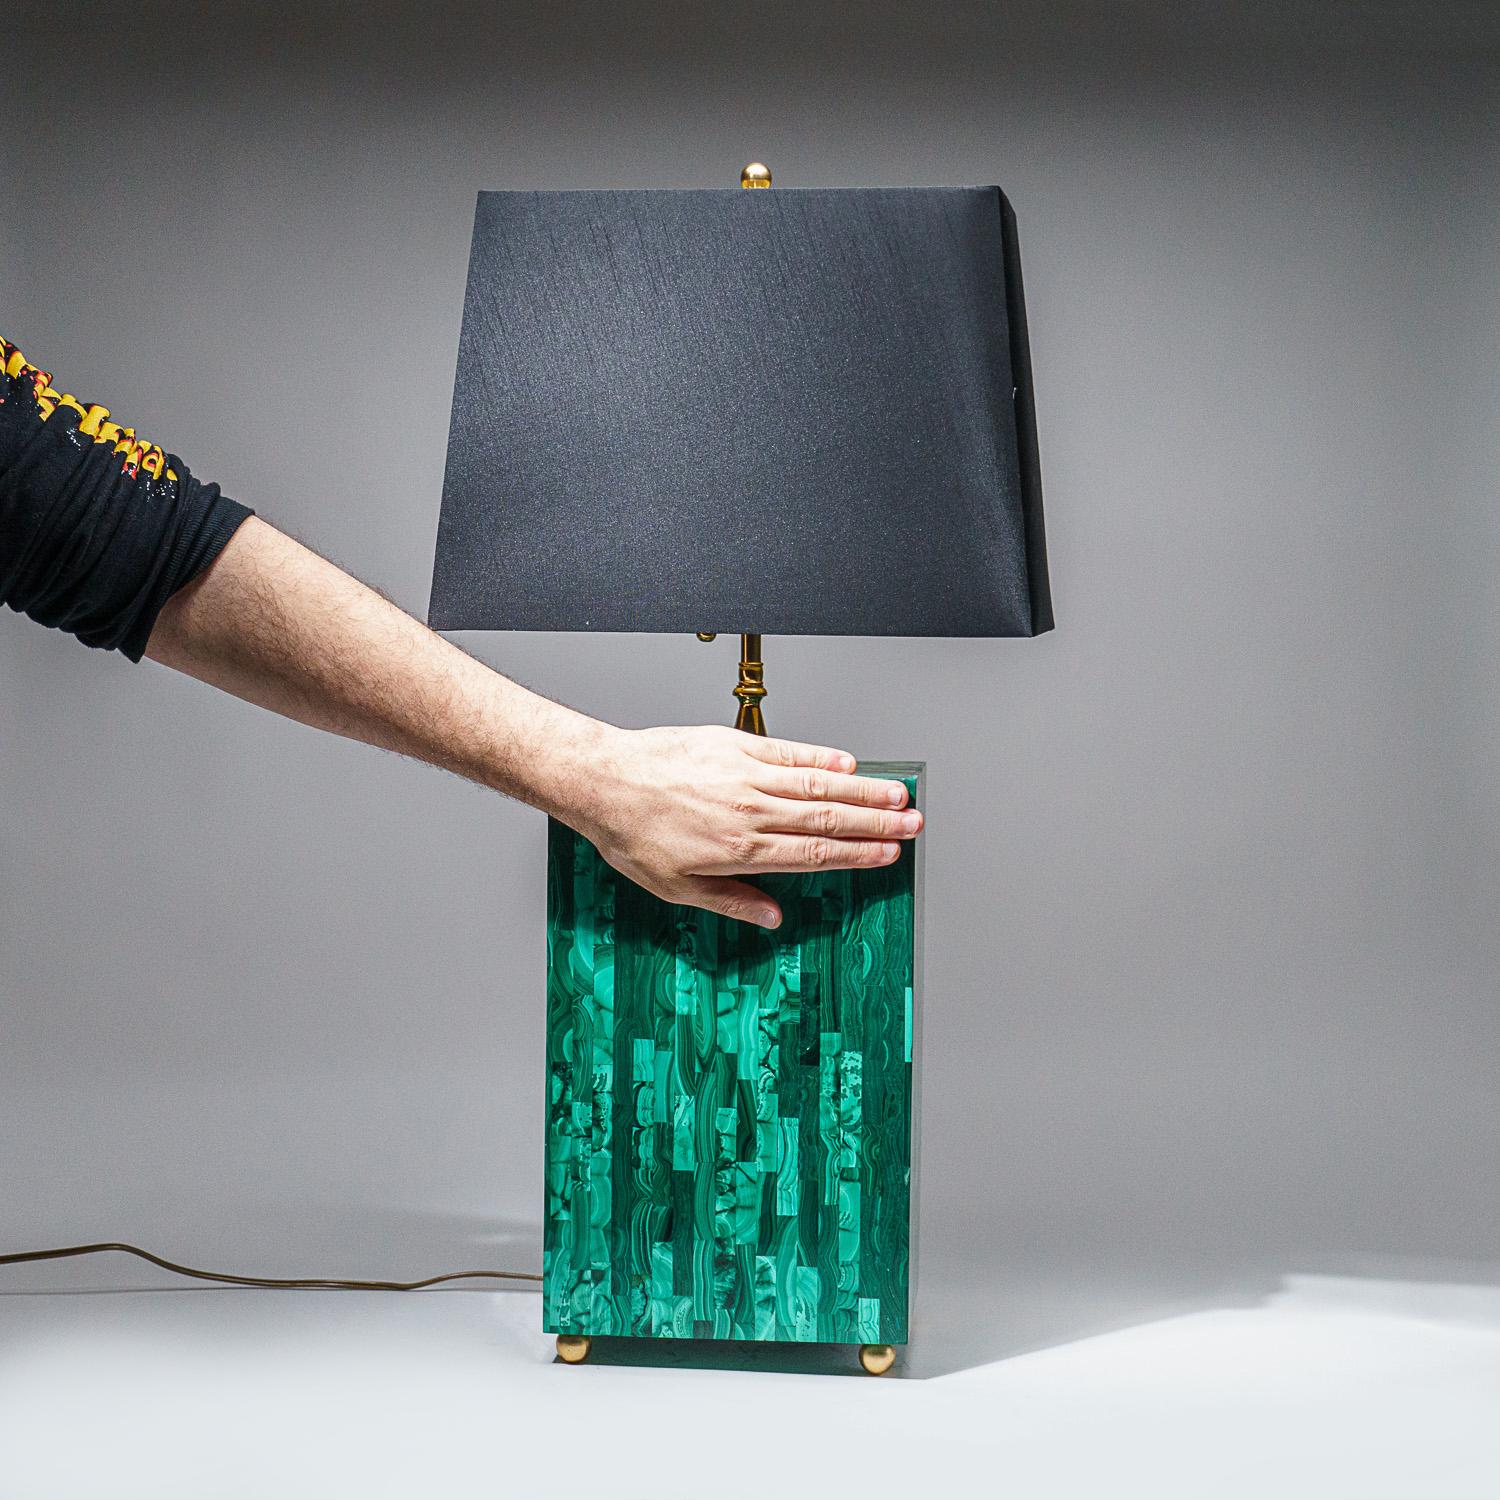 Handcrafted to perfection, this lamp was made from AAA quality natural Malachite. this rectangular polished lamp makes a beautiful display with its high quality craftsmanship. The black fabric lampshade is included in this piece. Its round metal